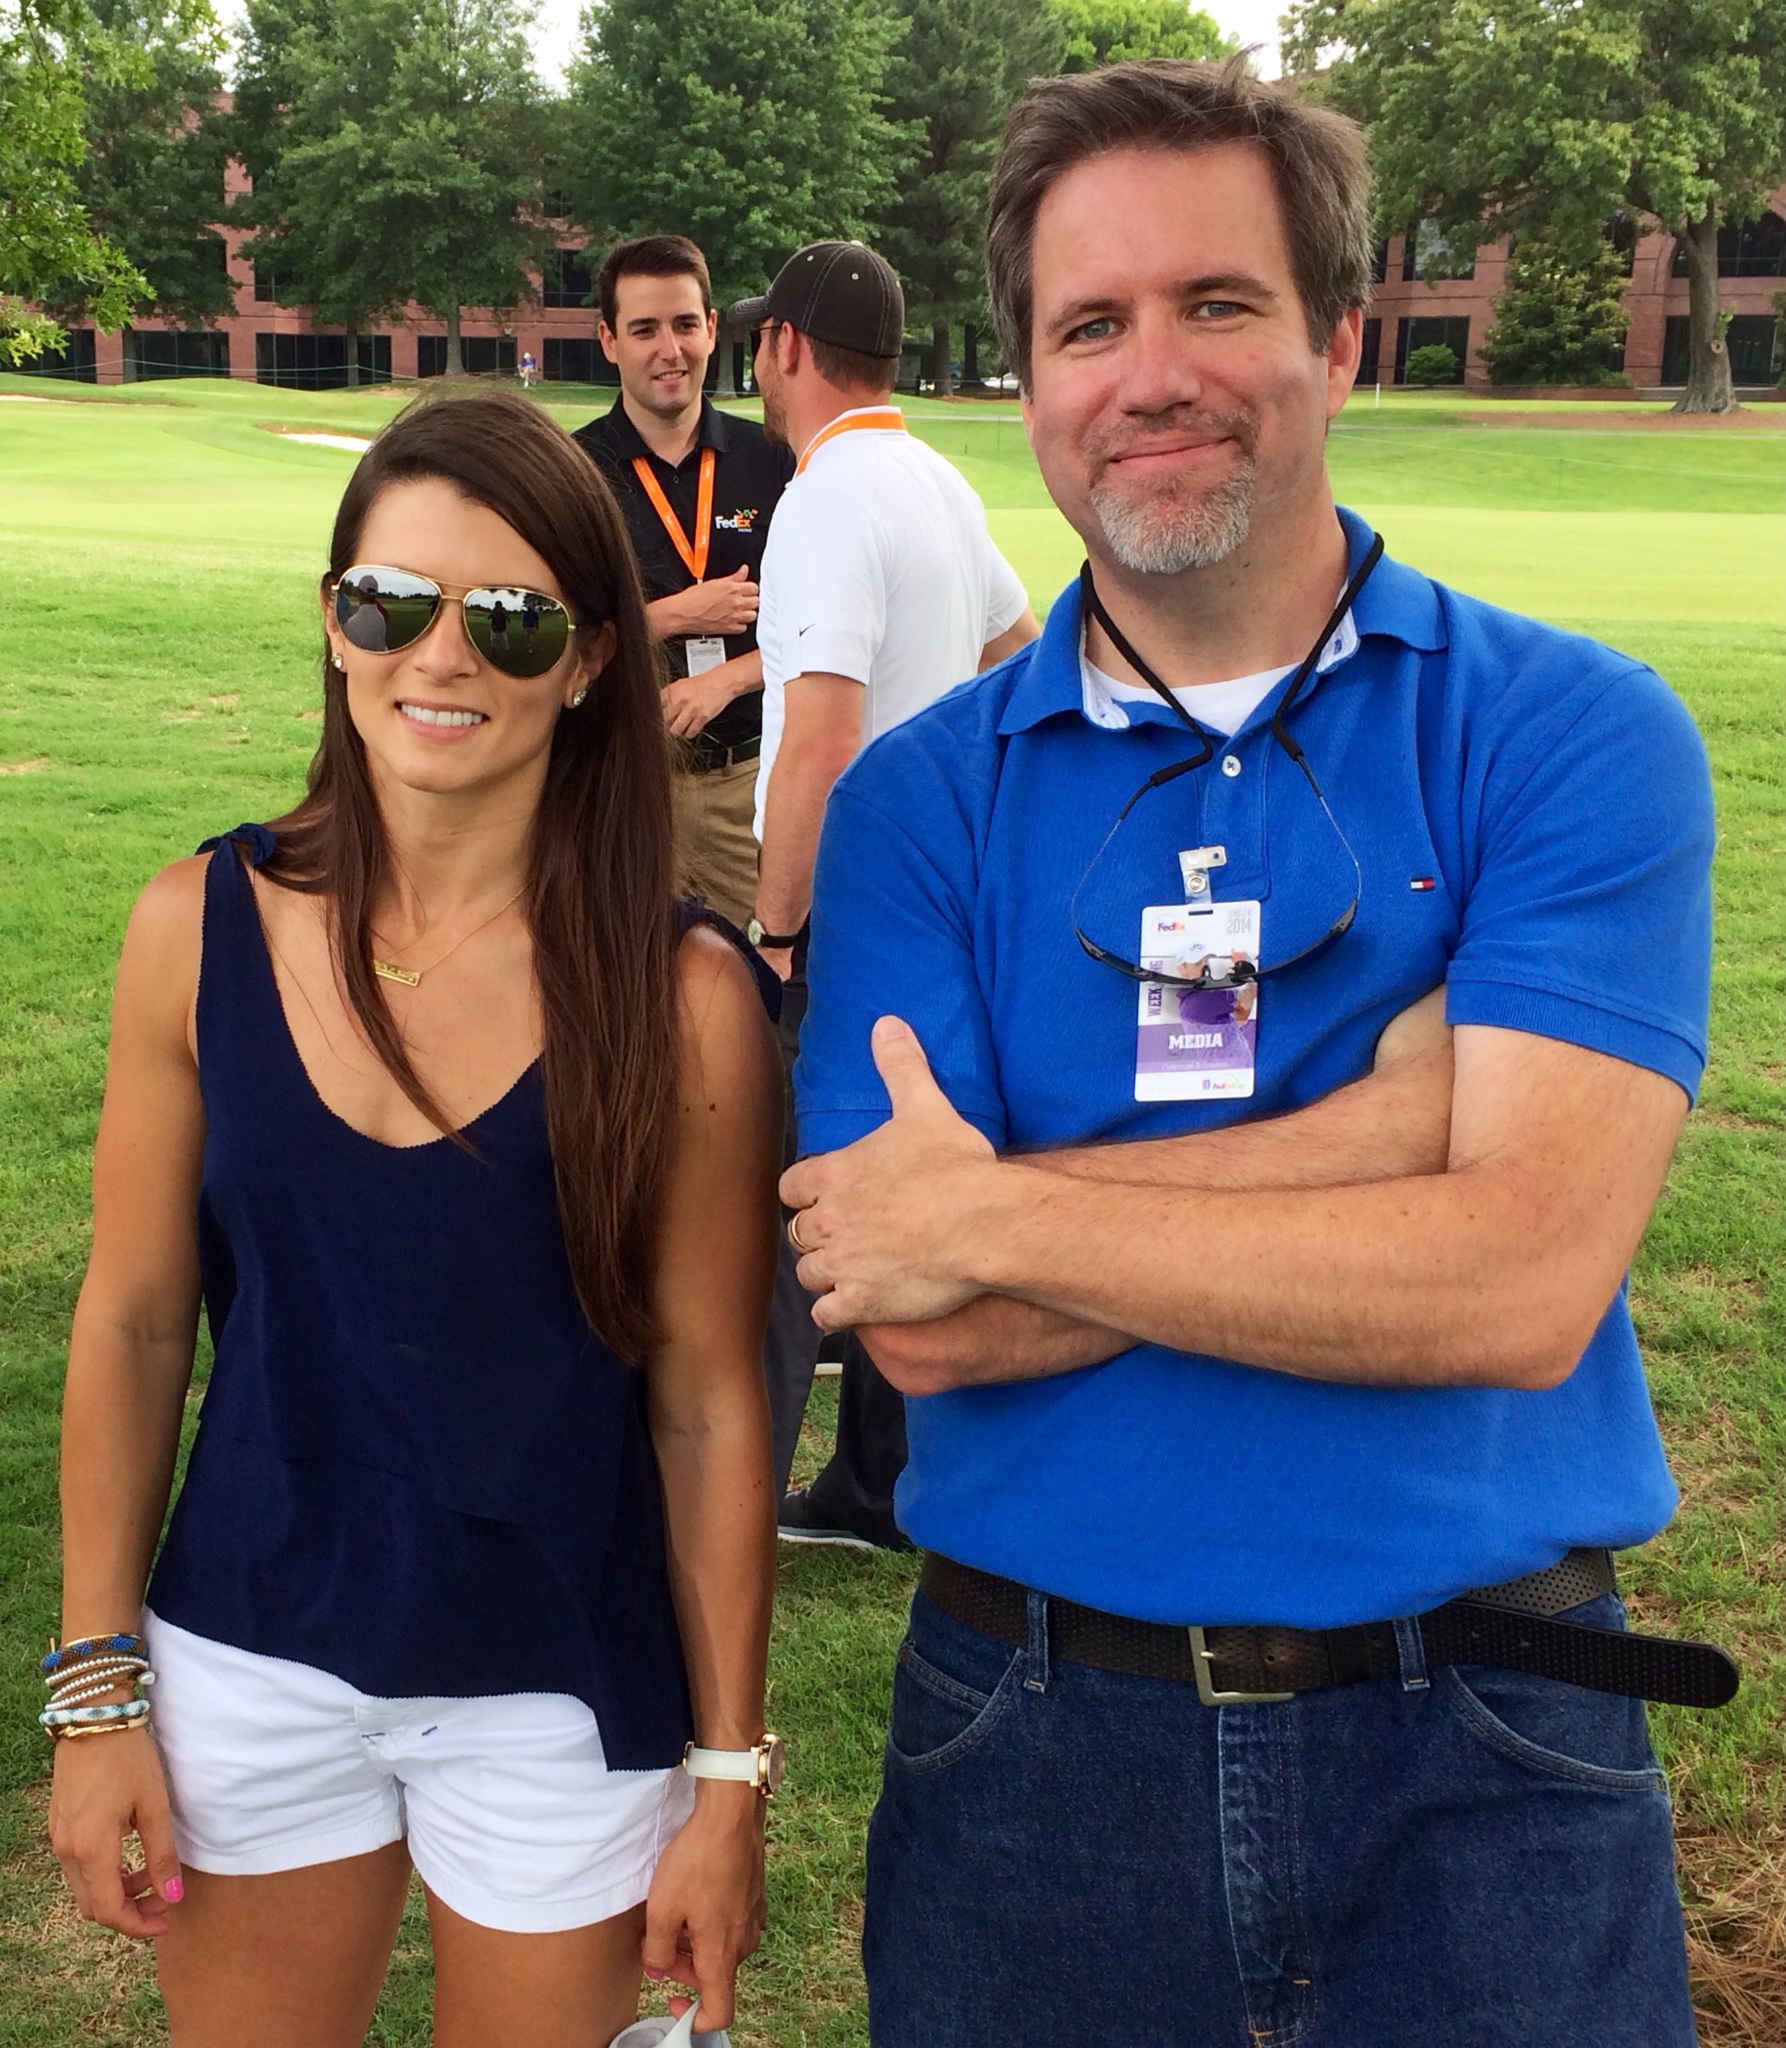 Gregory Gray shooting Hotty Toddy video with Danica Patrick for Ole Miss Sports Productions